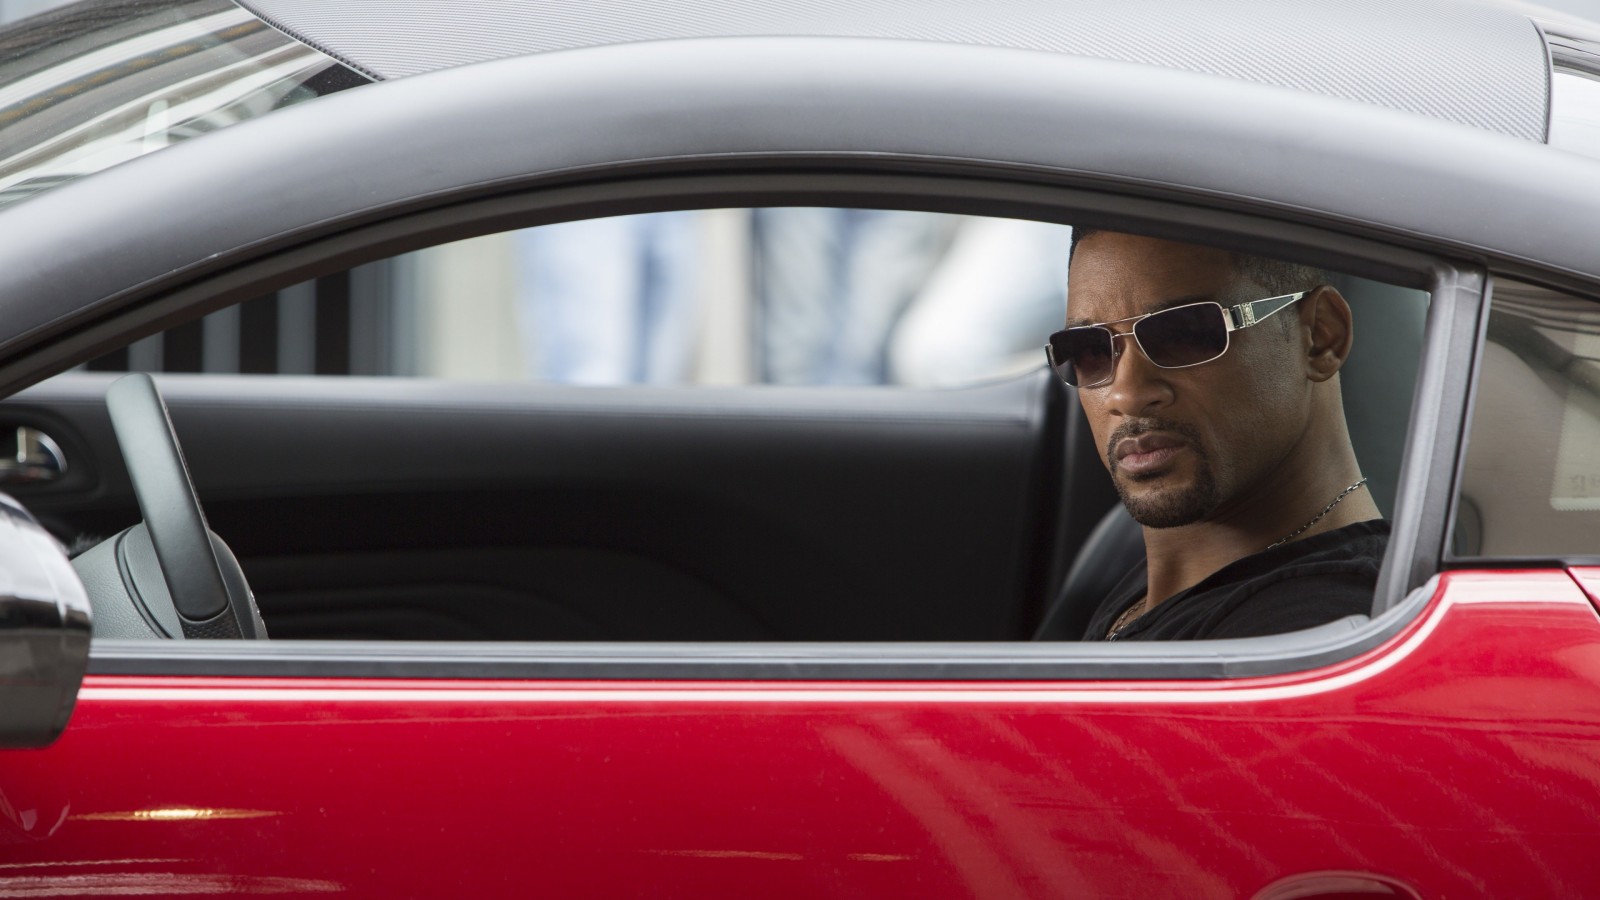 Will Smith at the shooting of "Focus" Wallpaper for Desktop 1600x900